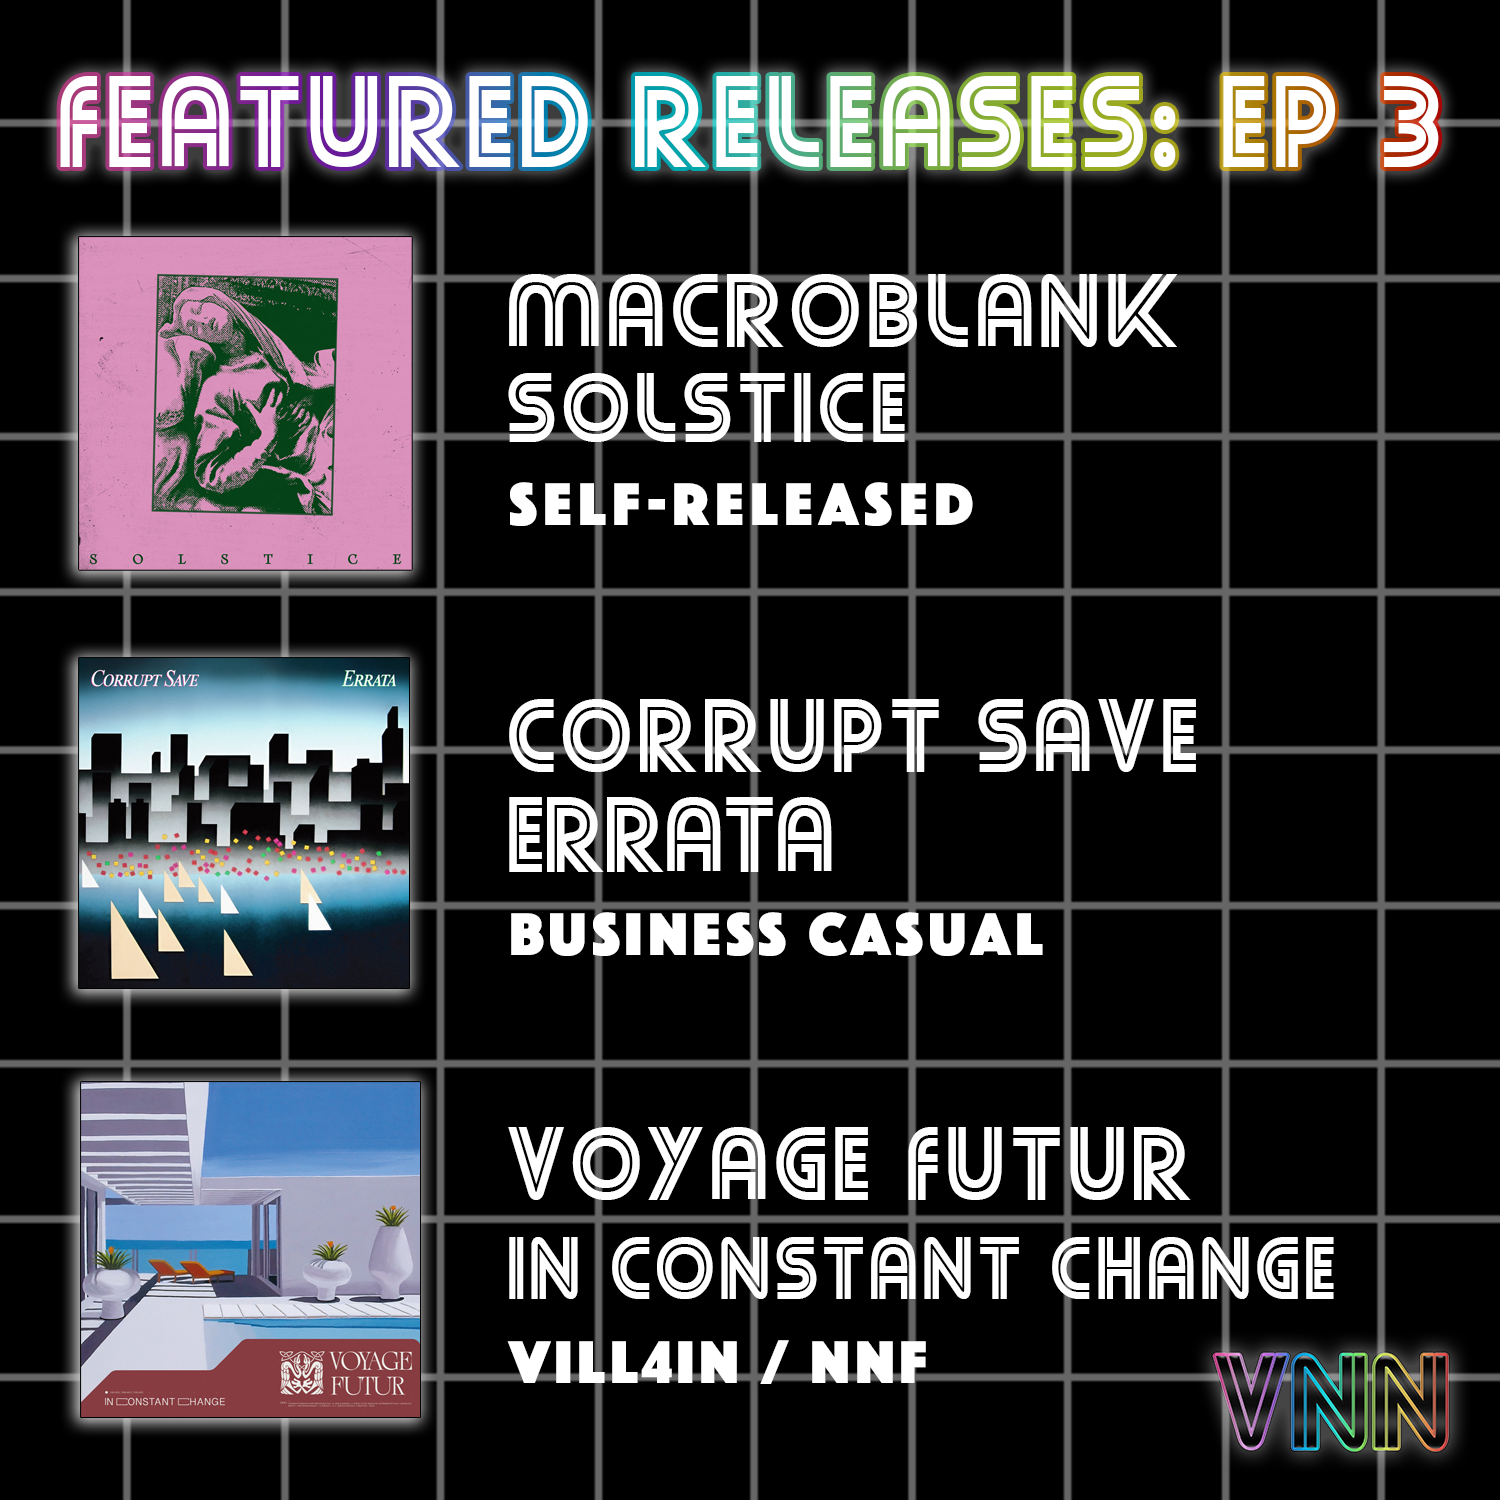 Featured Releases: Macroblank - Solstice, Corrupt Save - Errata & Voyage Futur - In Constant Change (Ep. 3)